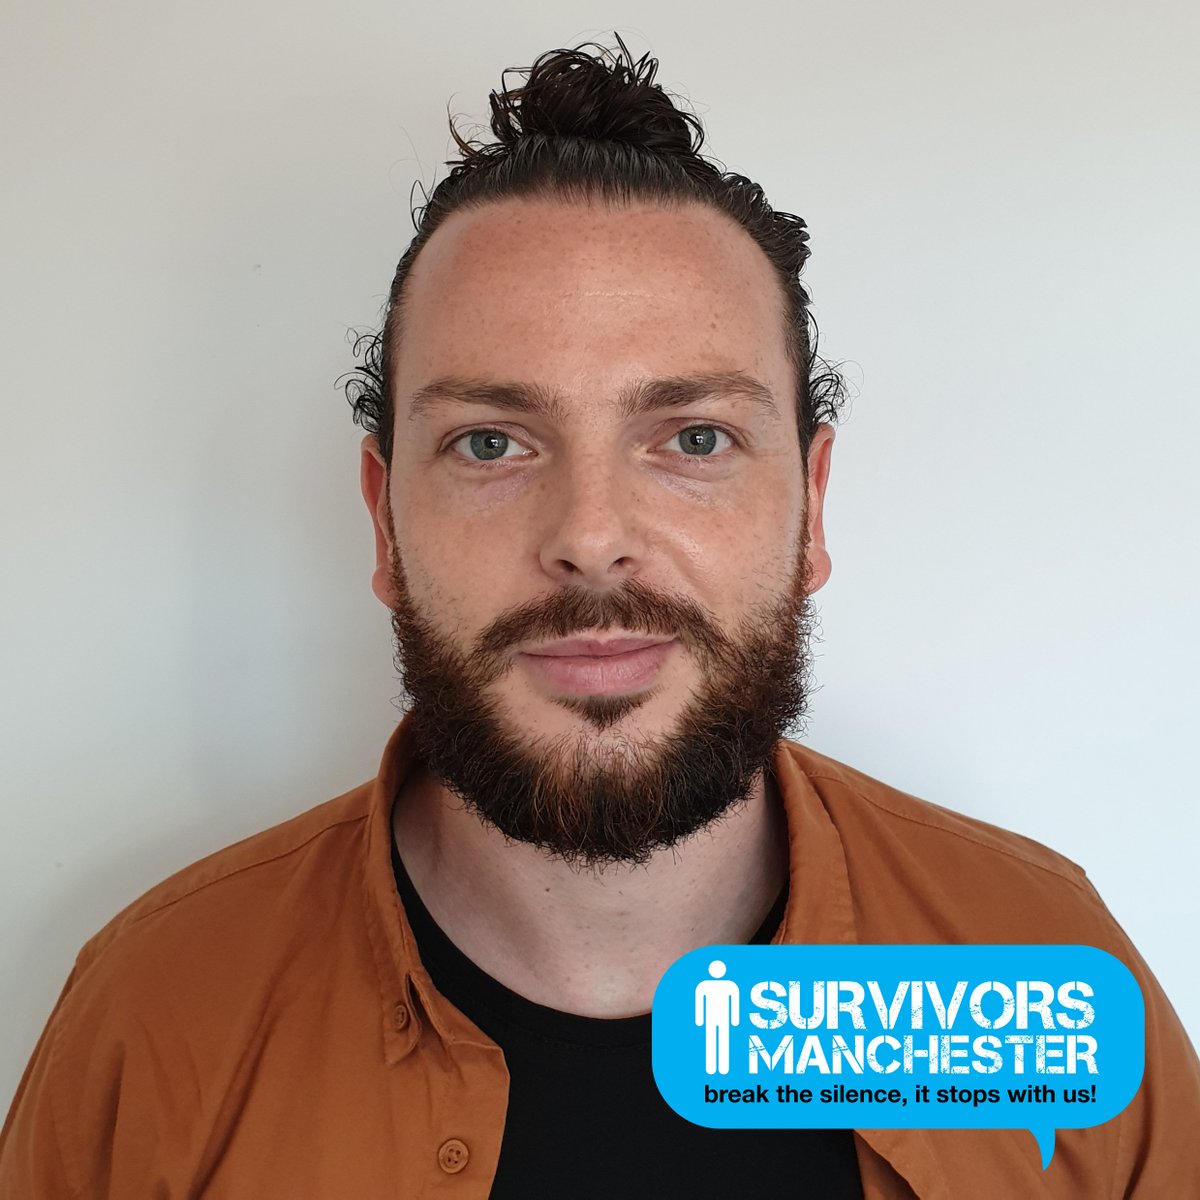 Next up in our 'oops, we're behind in welcoming our new team members' we're giving a big shout out to Rob, another of our new Trauma Therapists who will be joining our OUT Spoken team #TeamWork #Prison #RehabilitativeCulture